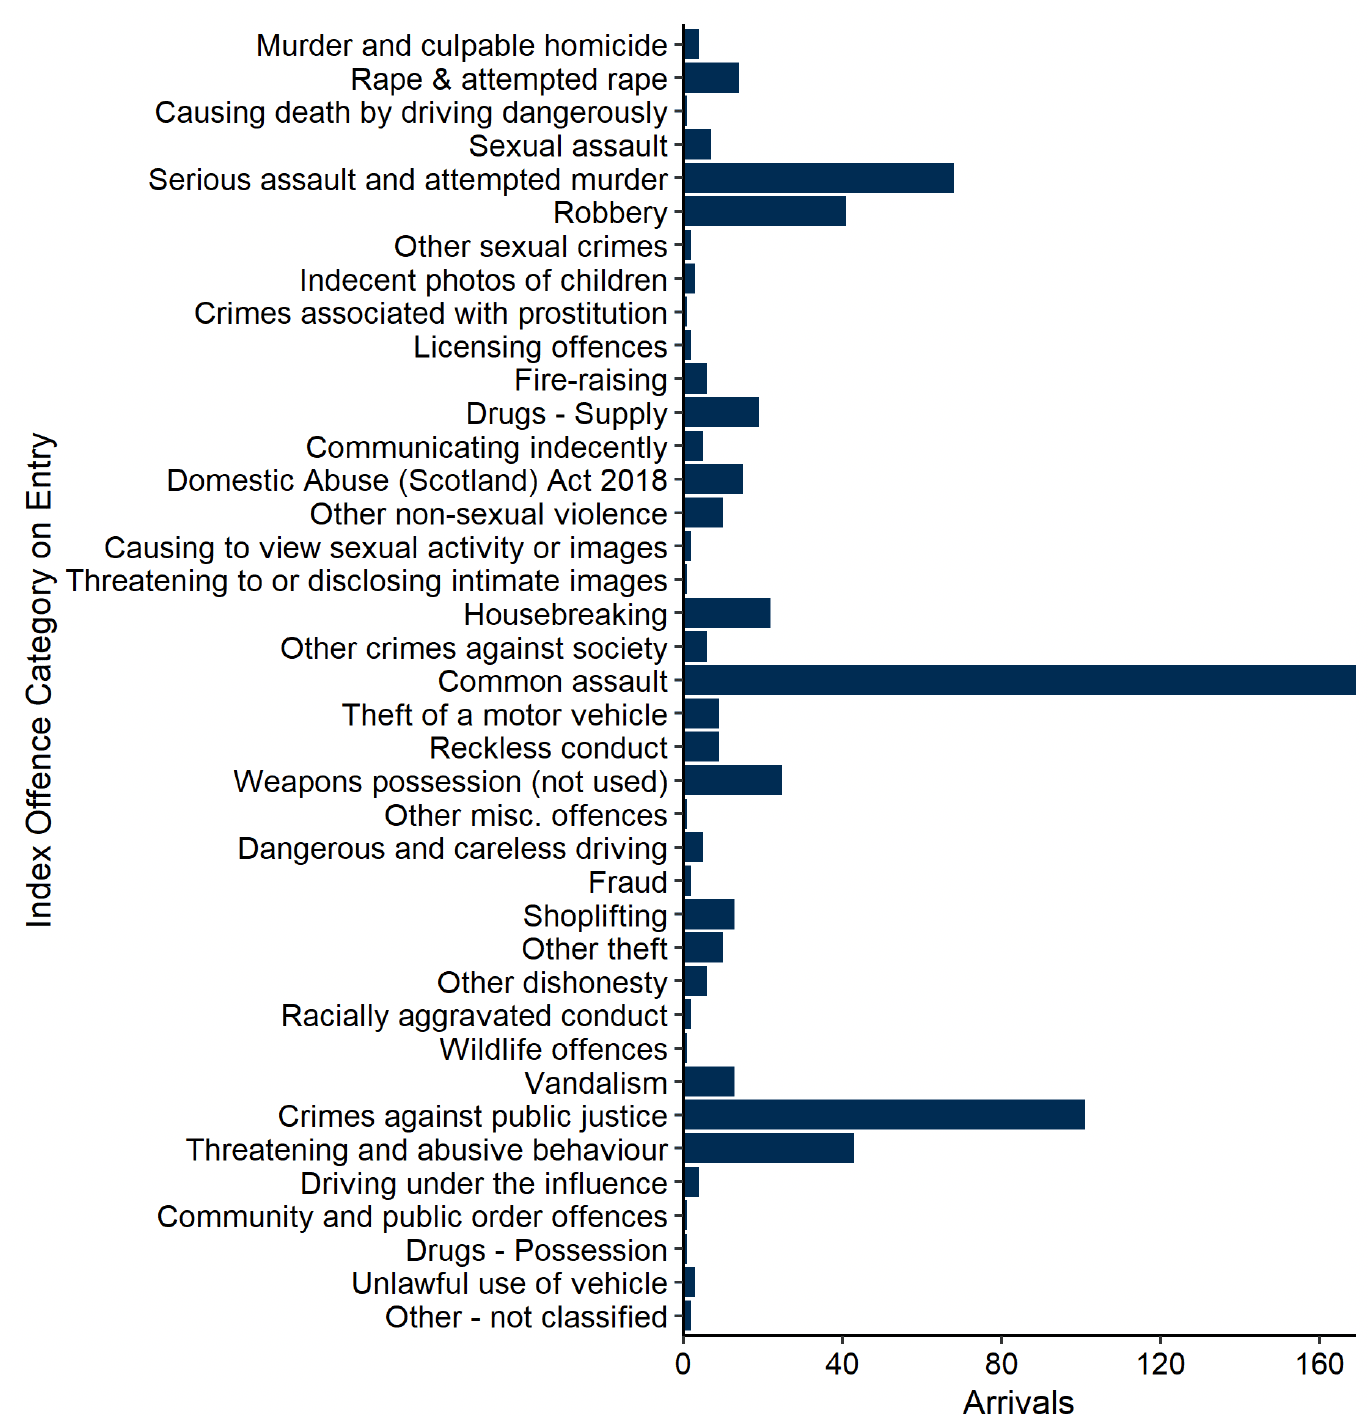 The index offences of the 649 arriving to untried and convicted awaiting sentence legal statuses in December. Most common was common assault (169 in total), followed by crimes against public justice (101), serious assault and attempted murder (68), threatening and abusive behaviour (43) then robbery (41). Last updated January 2023. Next update due February 2023.